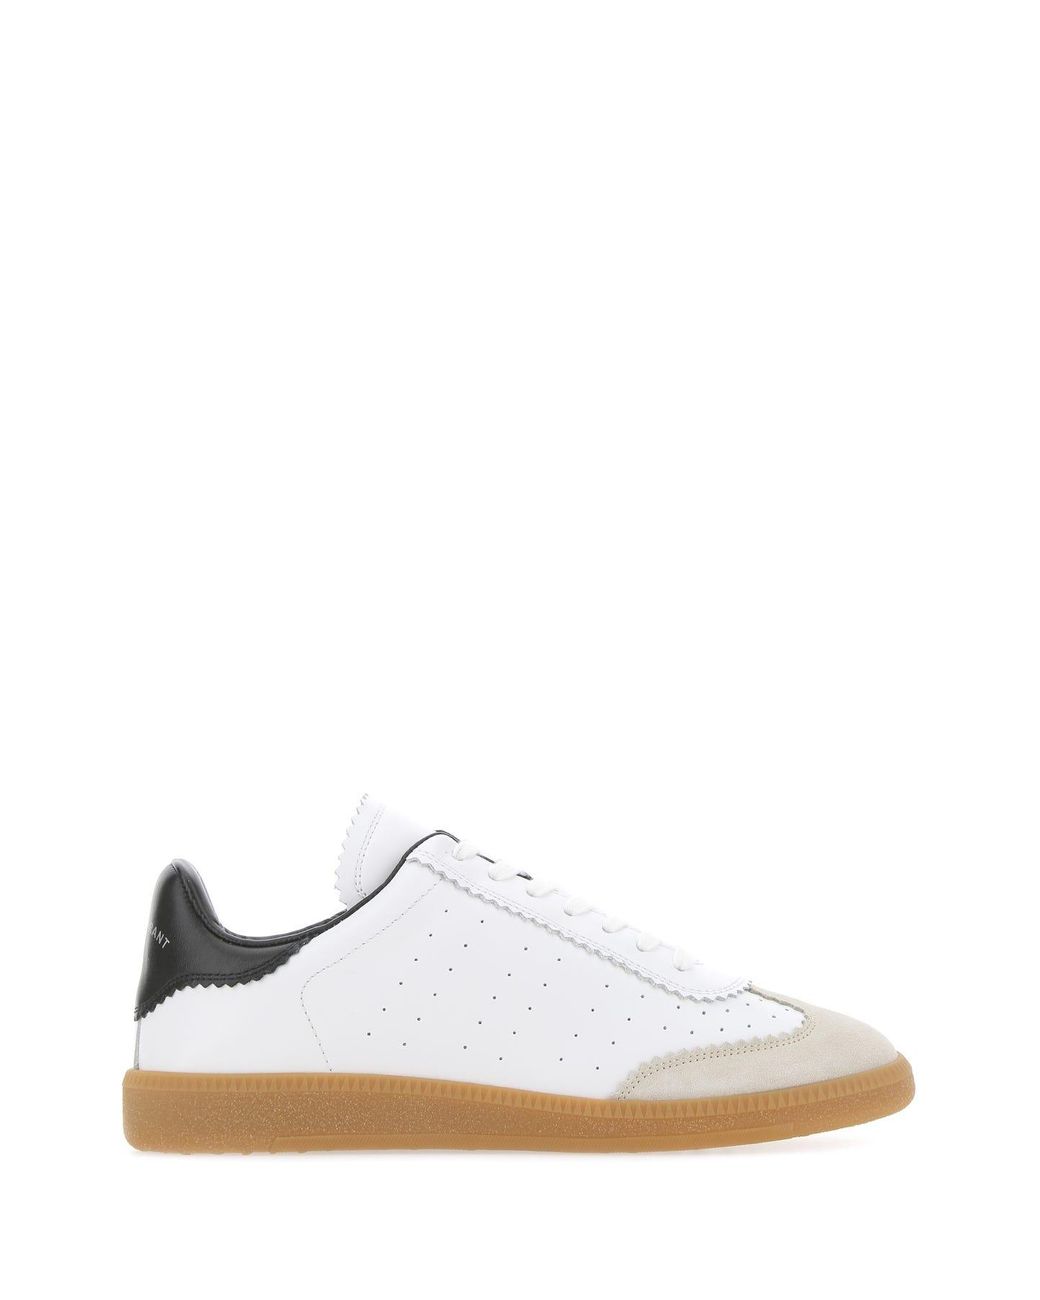 Étoile Isabel Marant Multicolor Leather Brycy Sneakers in White - Lyst